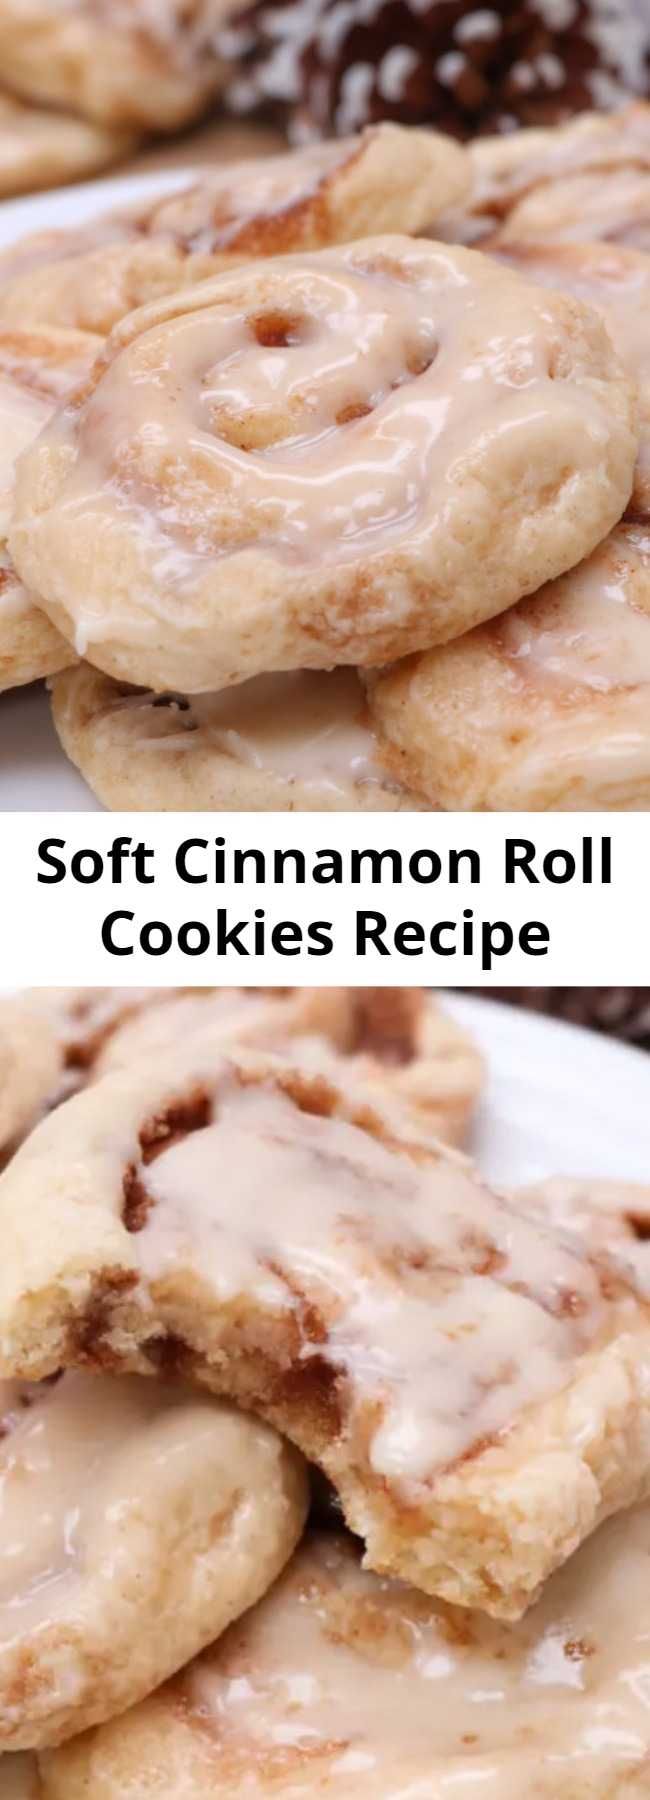 Soft Cinnamon Roll Cookies Recipe - A soft sugar cookie reminiscent of a cinnamon roll! Glazed with cream cheese glaze with swirls of cinnamon sugar. #cookies #cinnamonroll #soft #fluffy #desserts #homemade #chewy